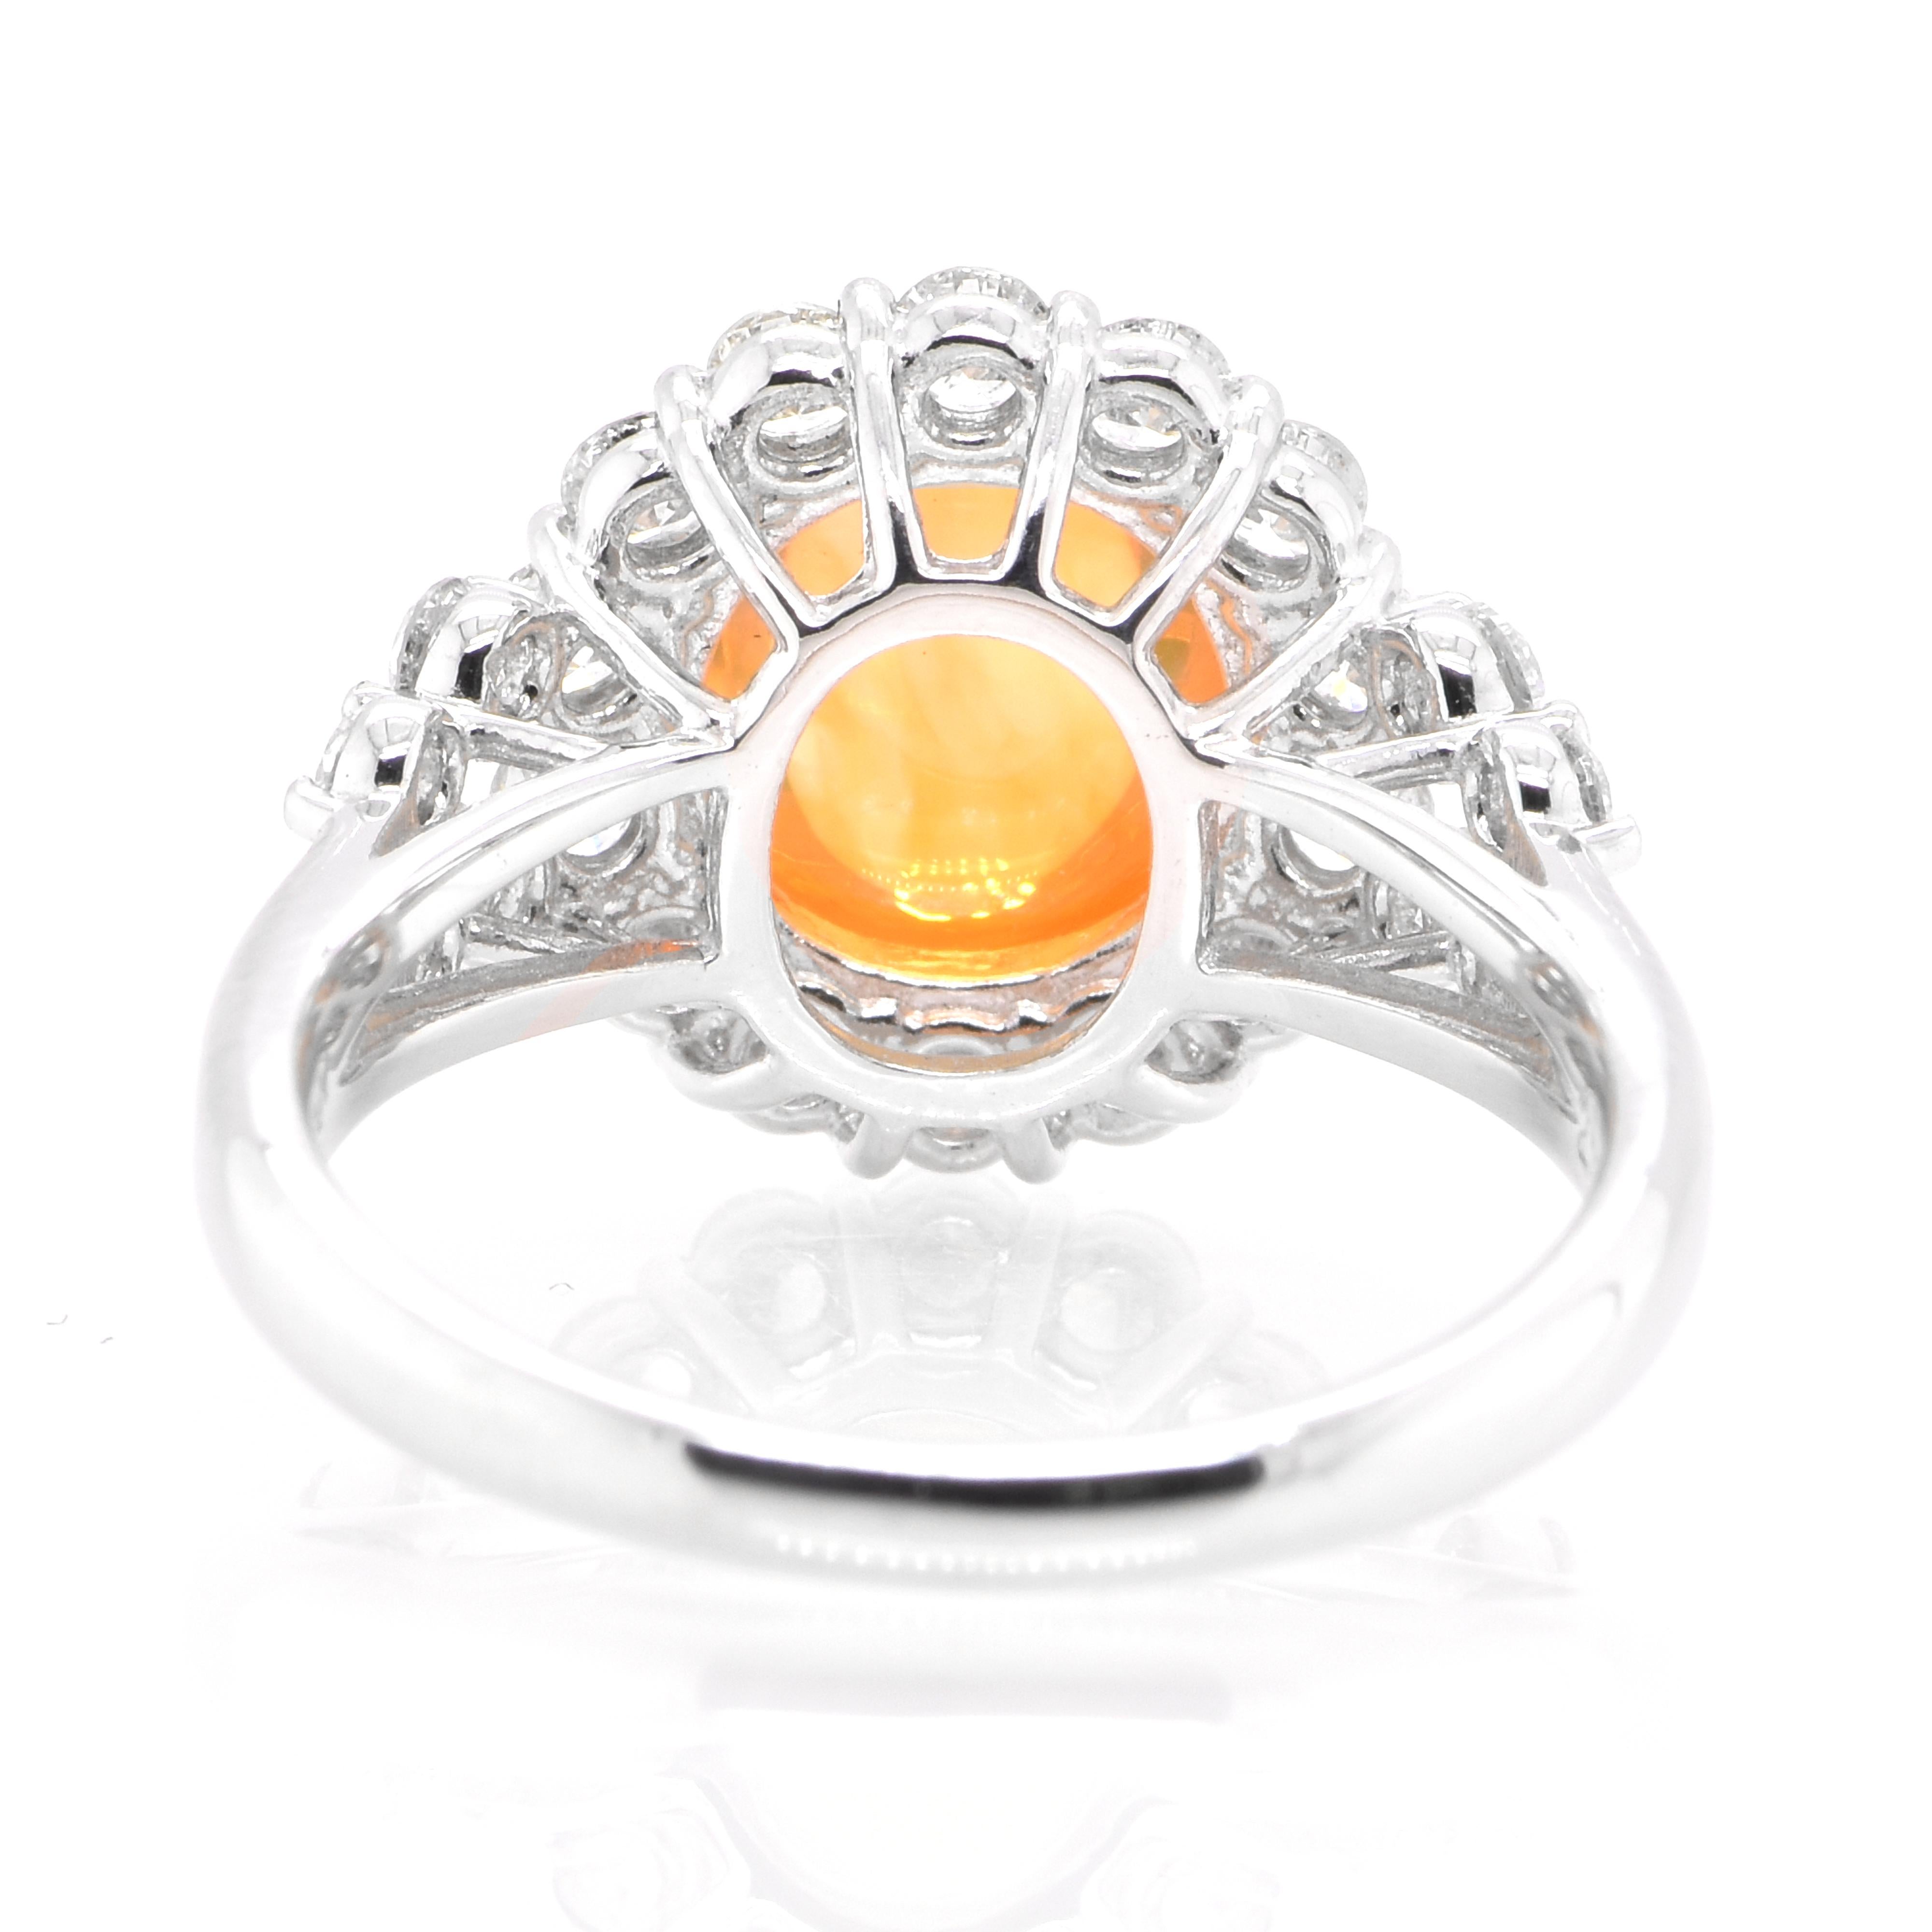 Modern 2.74 Carat Natural Mexican Fire Opal and Diamond Halo Ring Set in Platinum